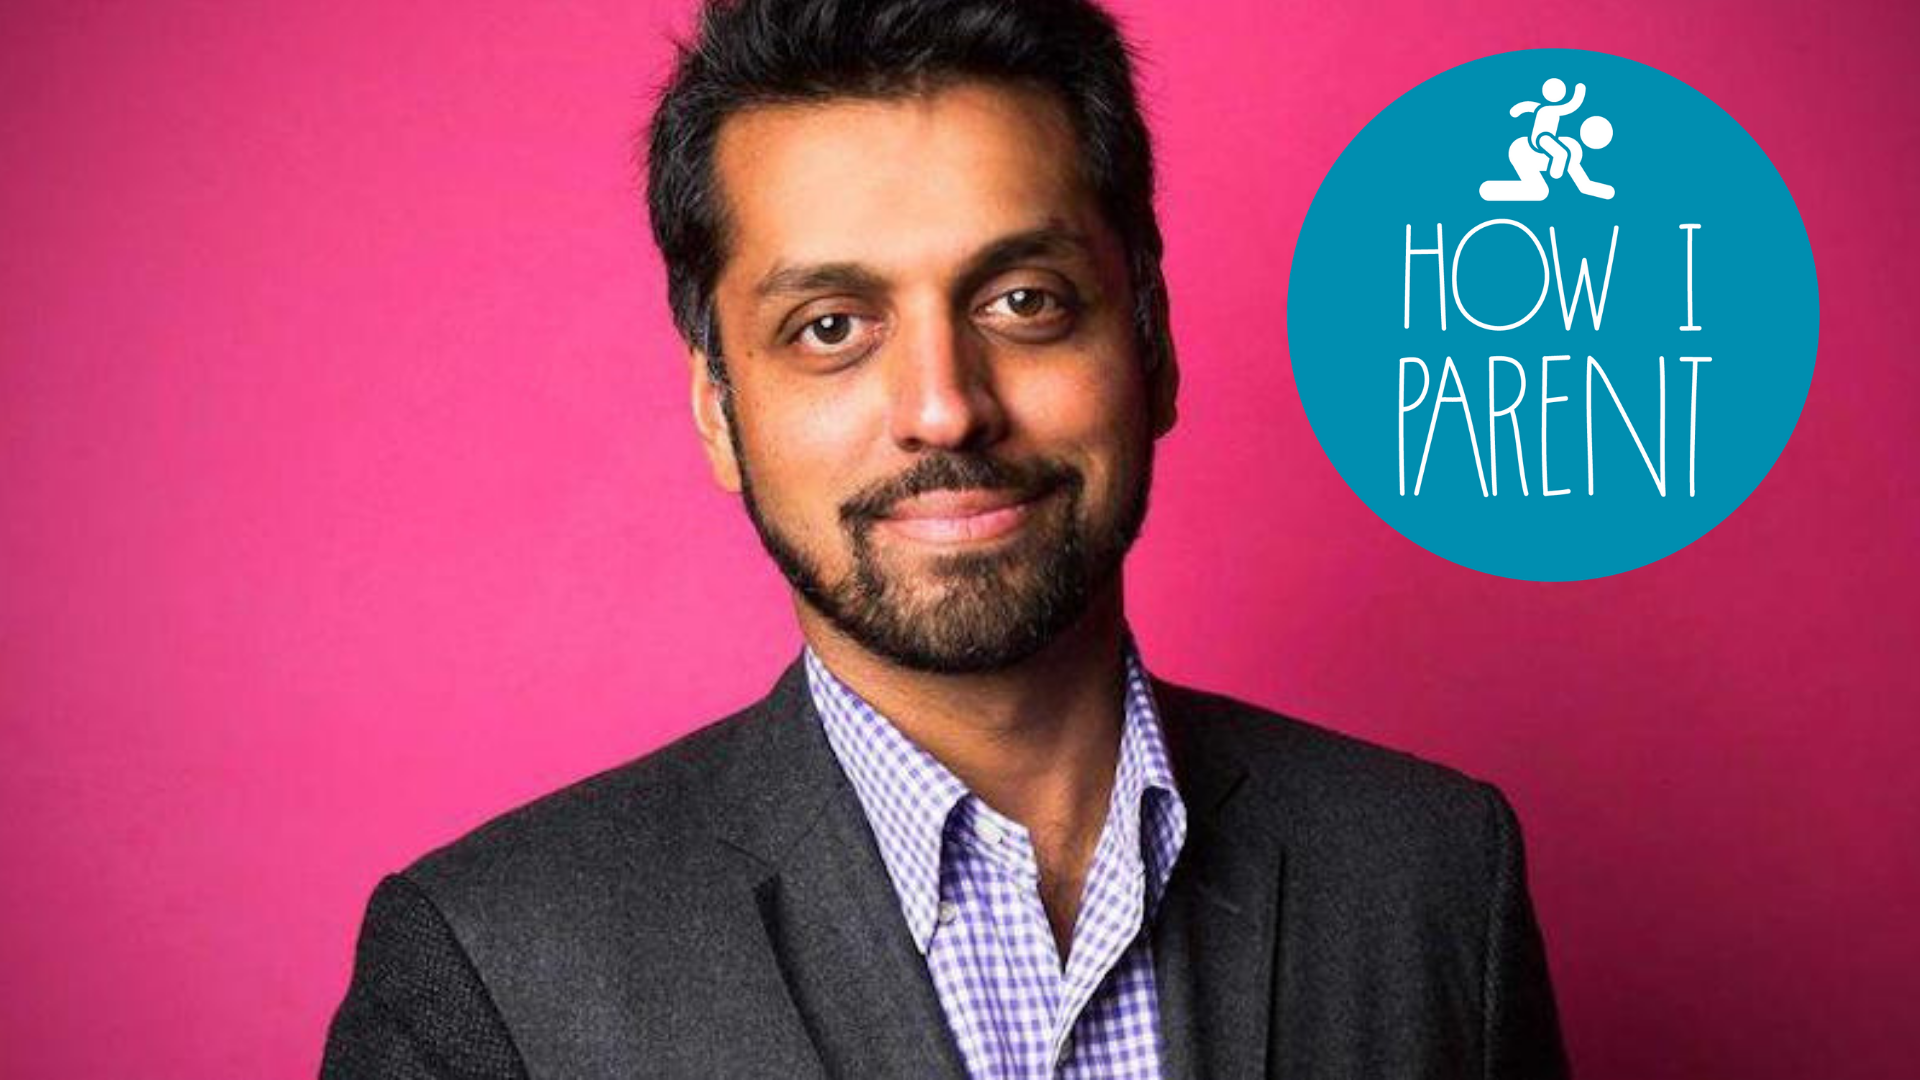 I’m Writer And Producer Wajahat Ali, And This Is How I Parent 